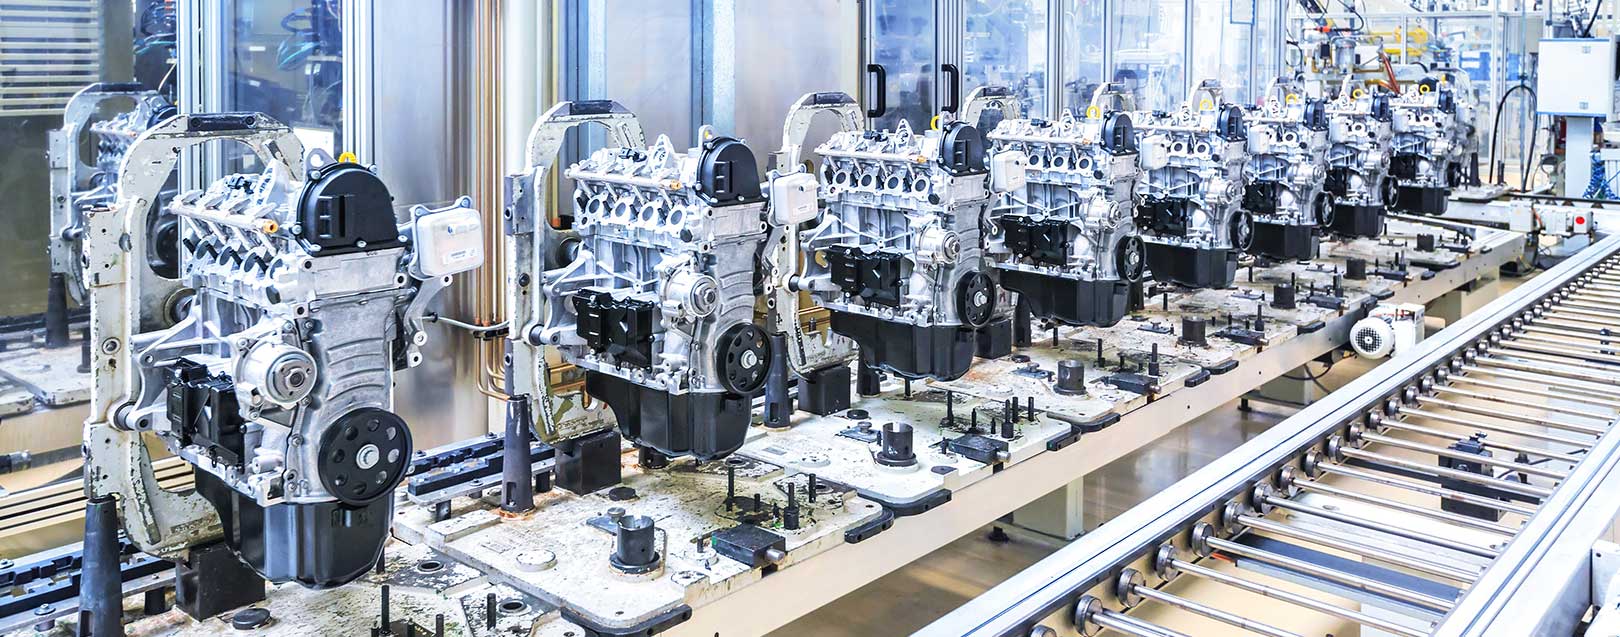 ACMA pegs auto components exports at $80 bn by 2026